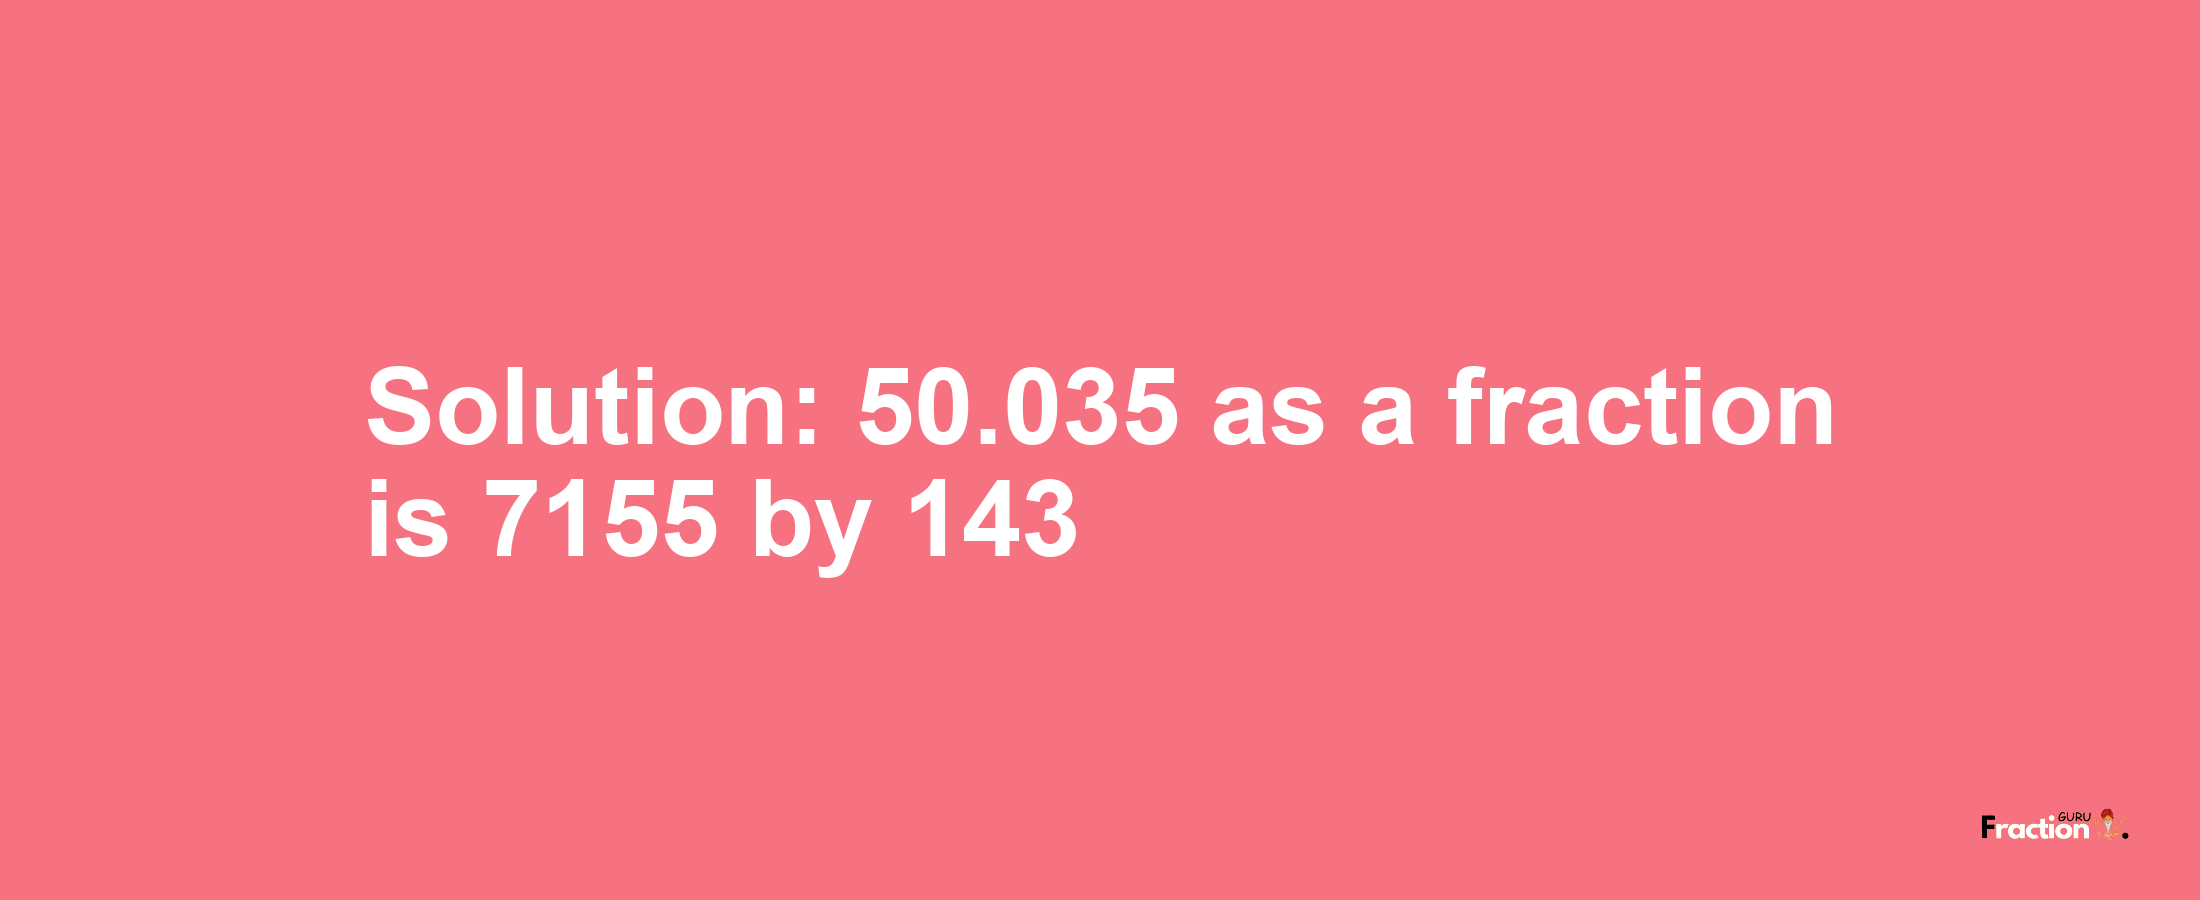 Solution:50.035 as a fraction is 7155/143